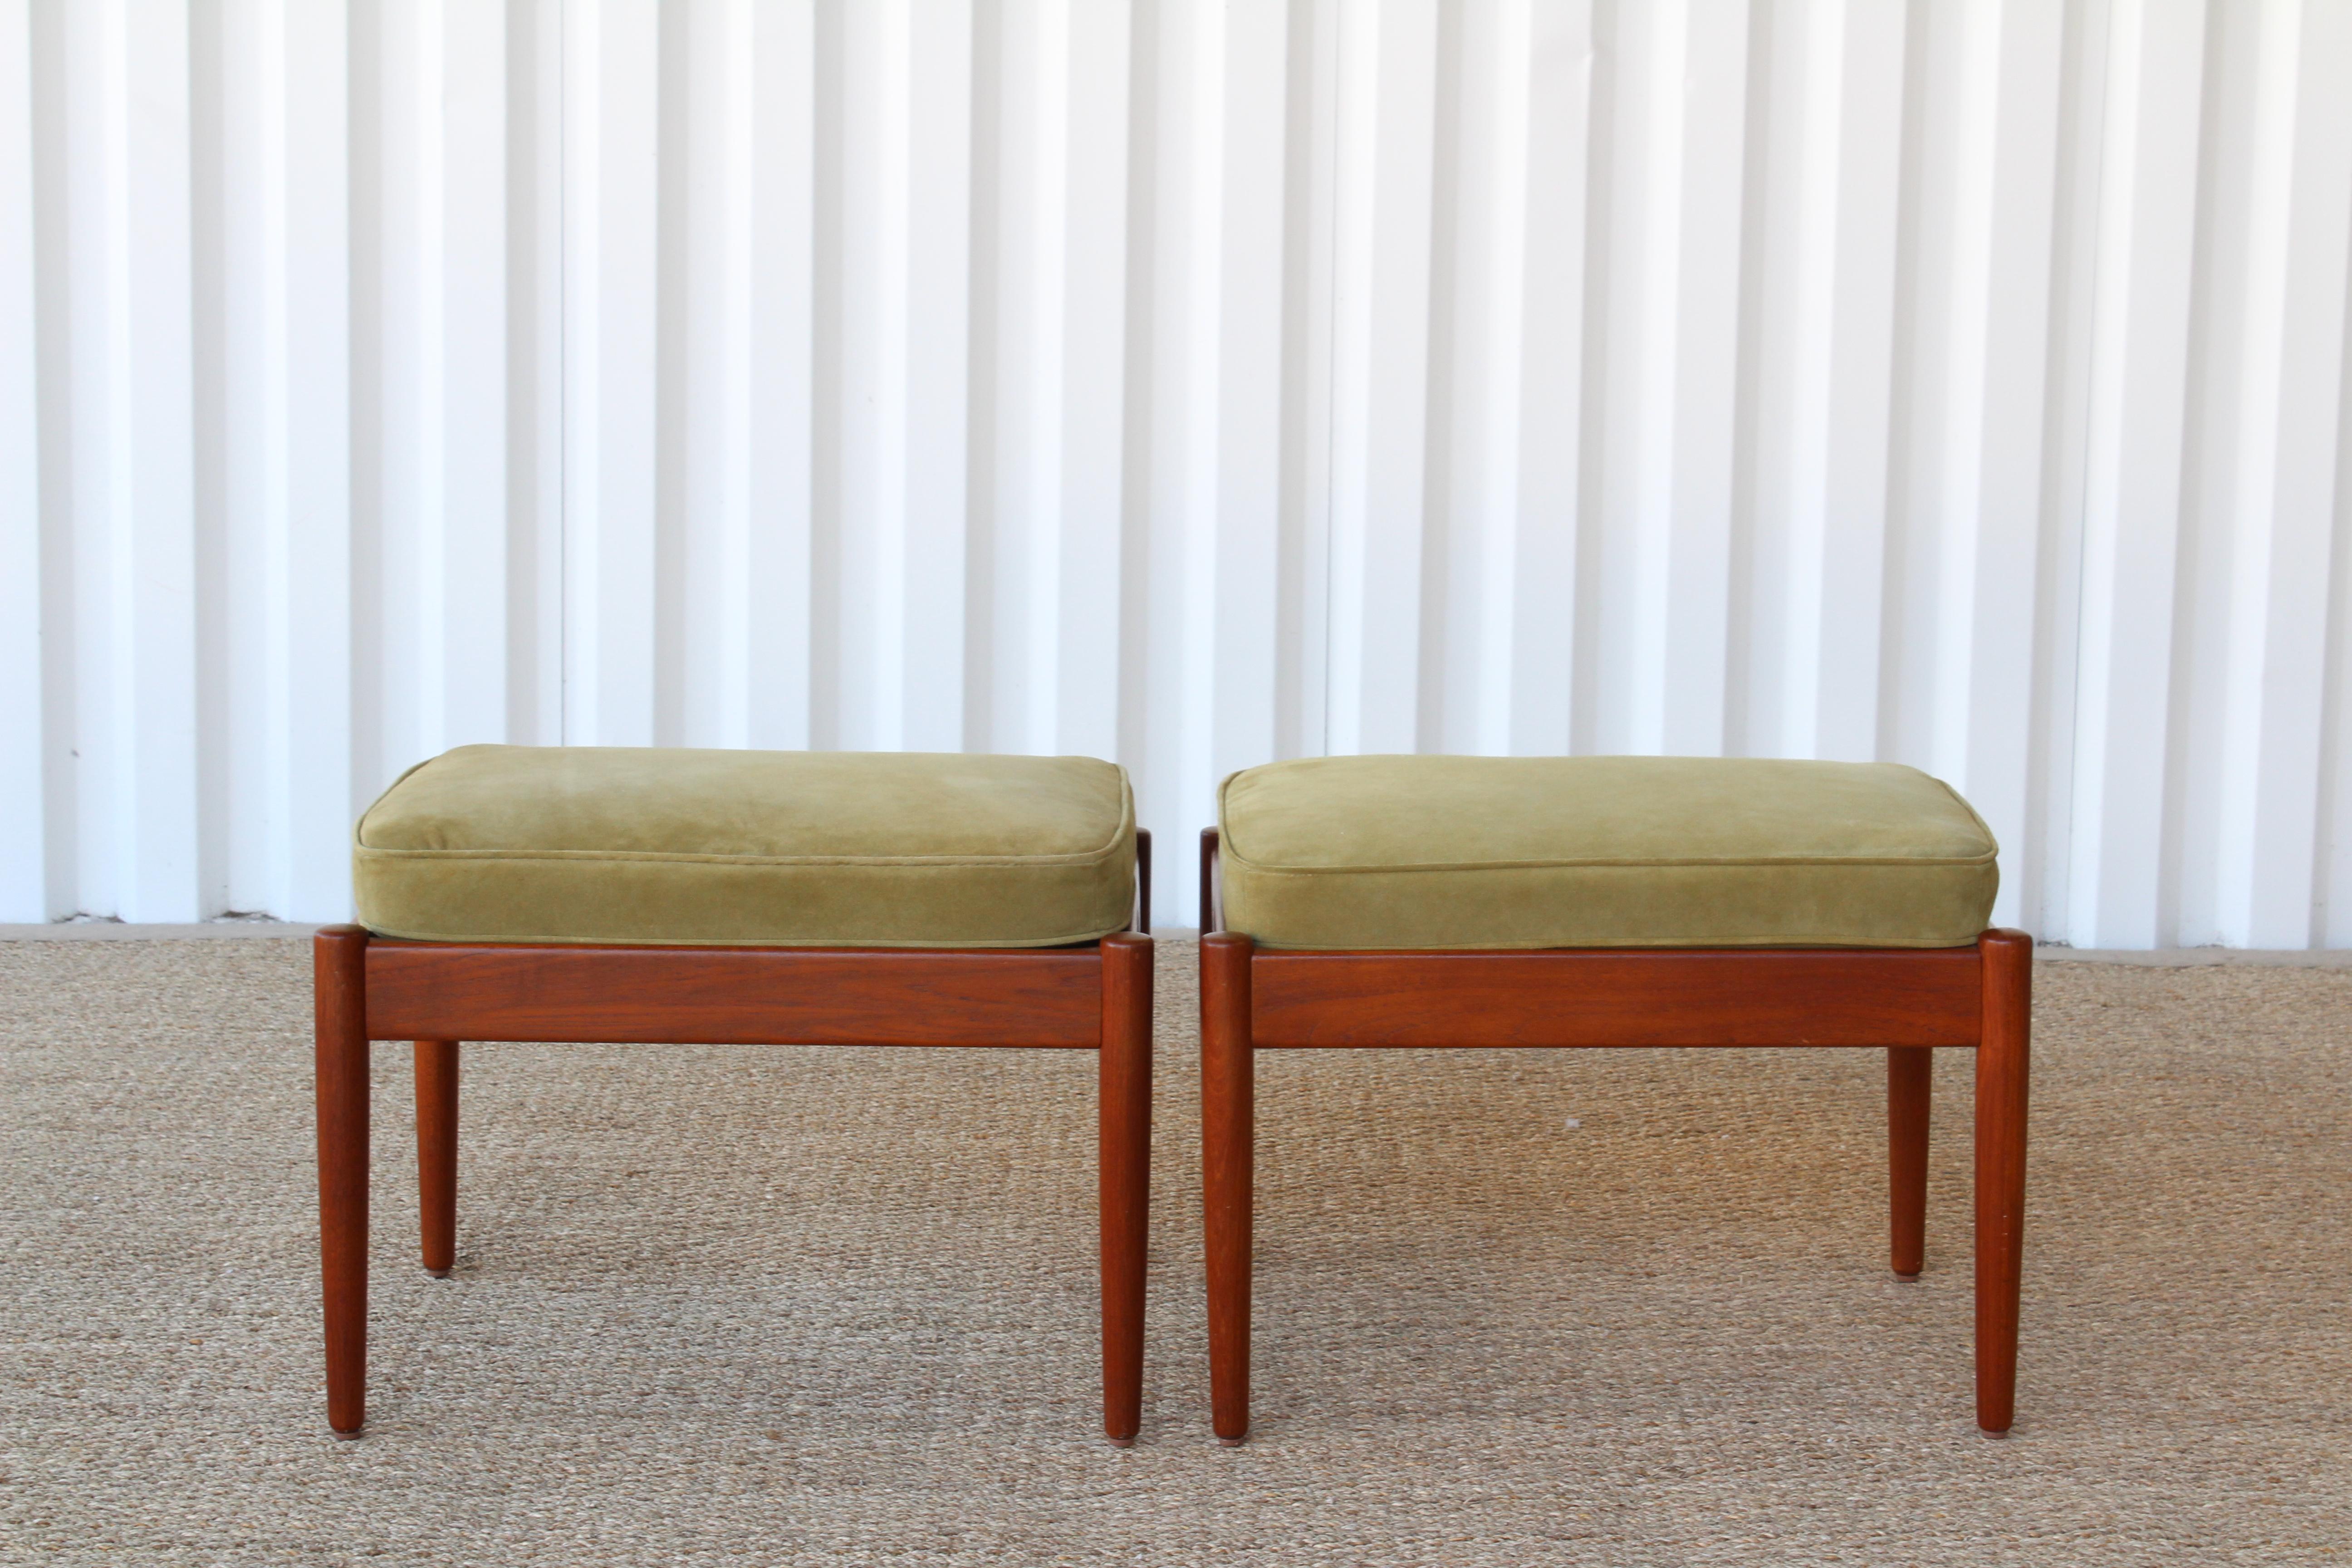 Pair of 1960s Danish teak stools with new green suede loose cushions. Teak frames have been refinished.